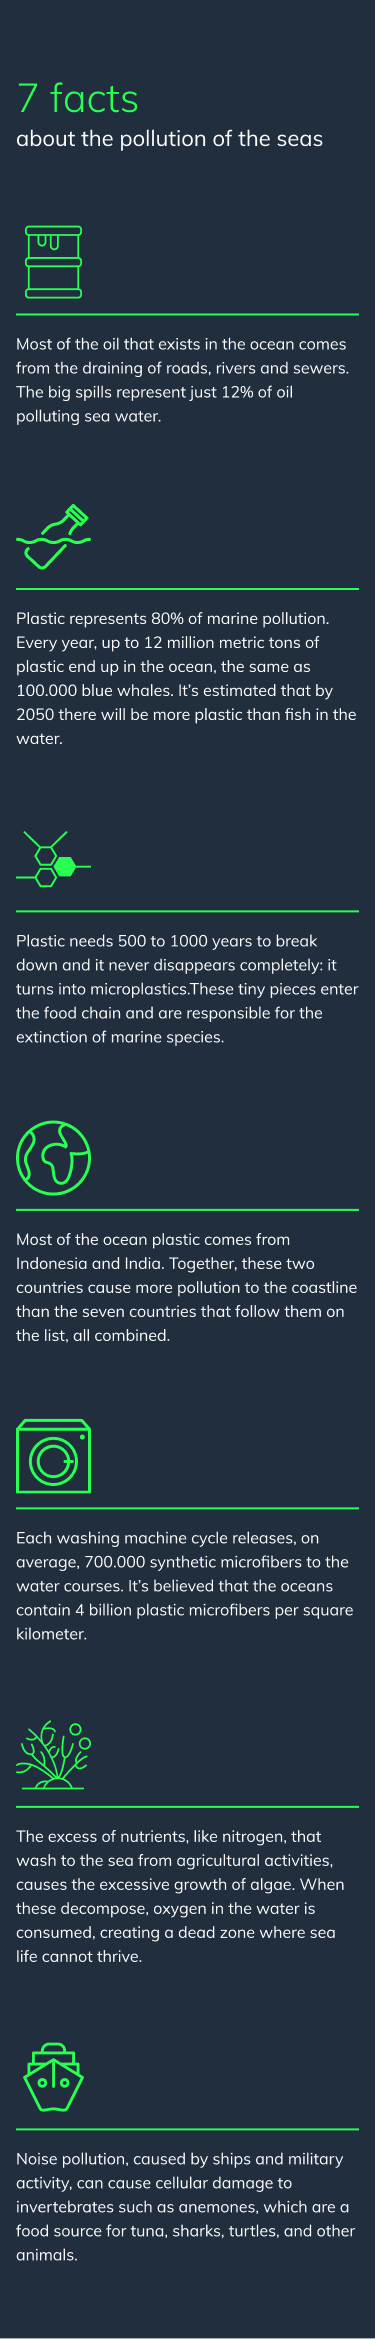 7 facts about the pollution of the seas